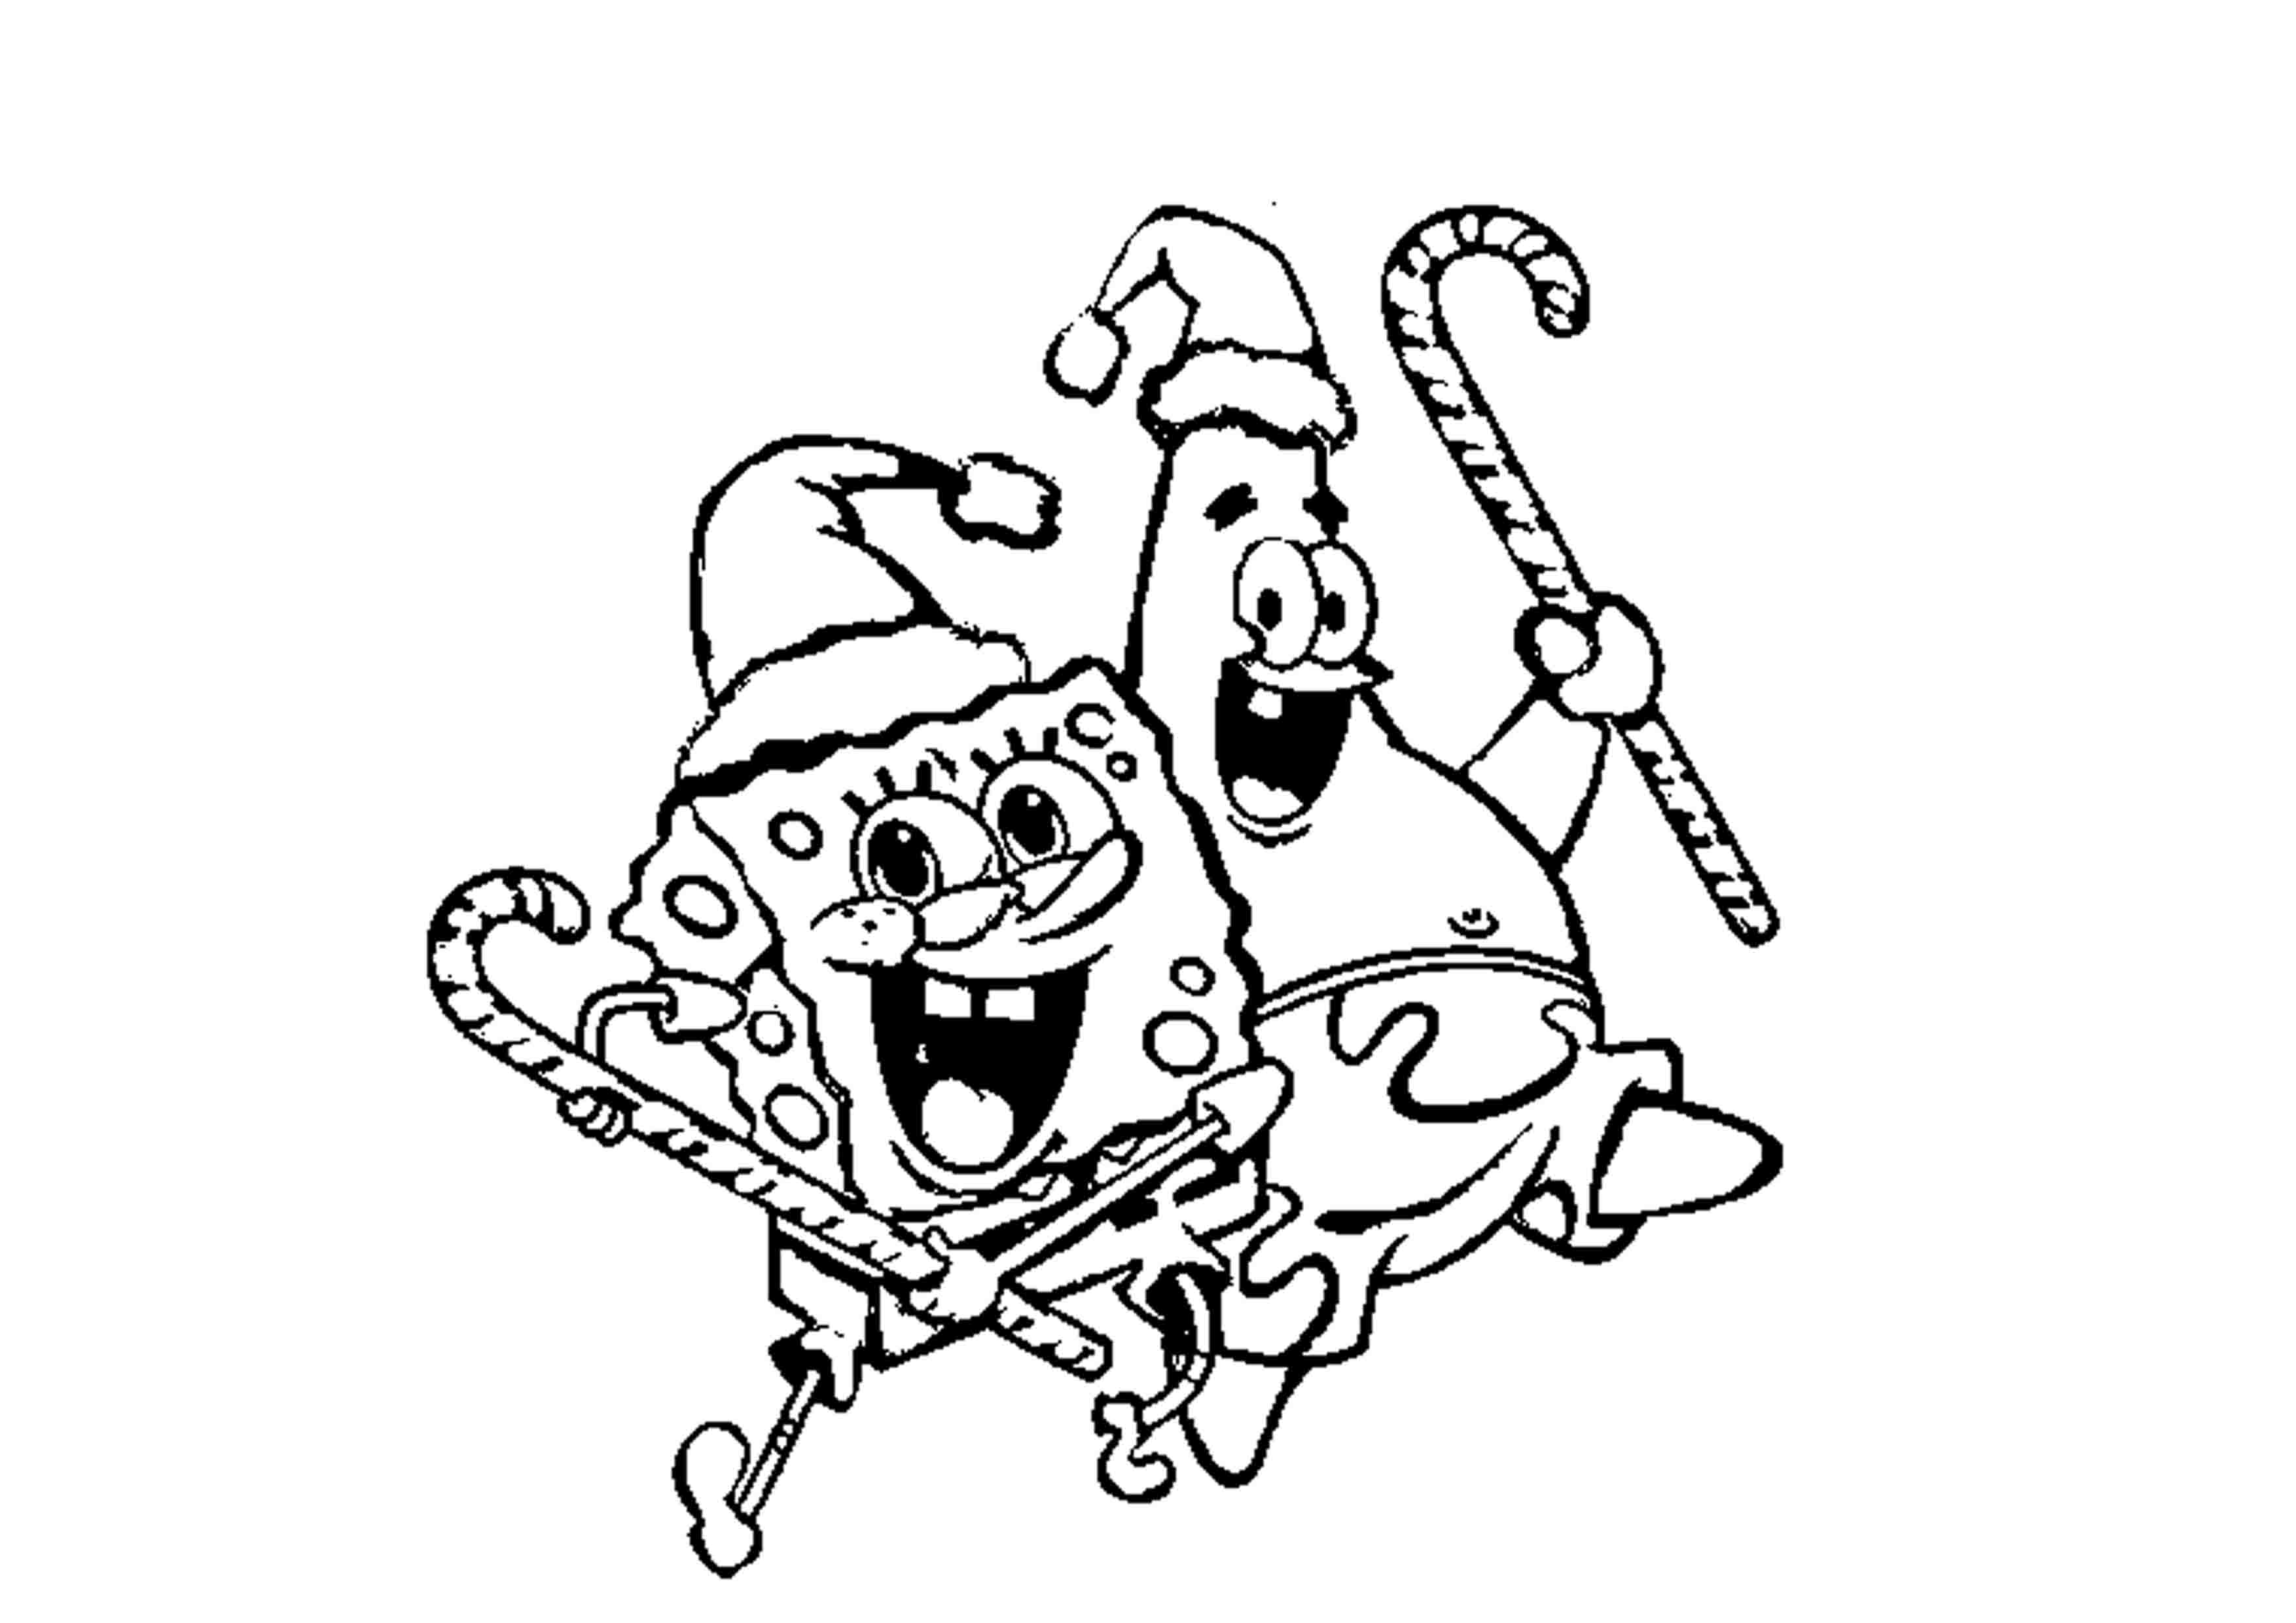 Sponge Bob Christmas Coloring Pictures - Coloring Pages for Kids ...